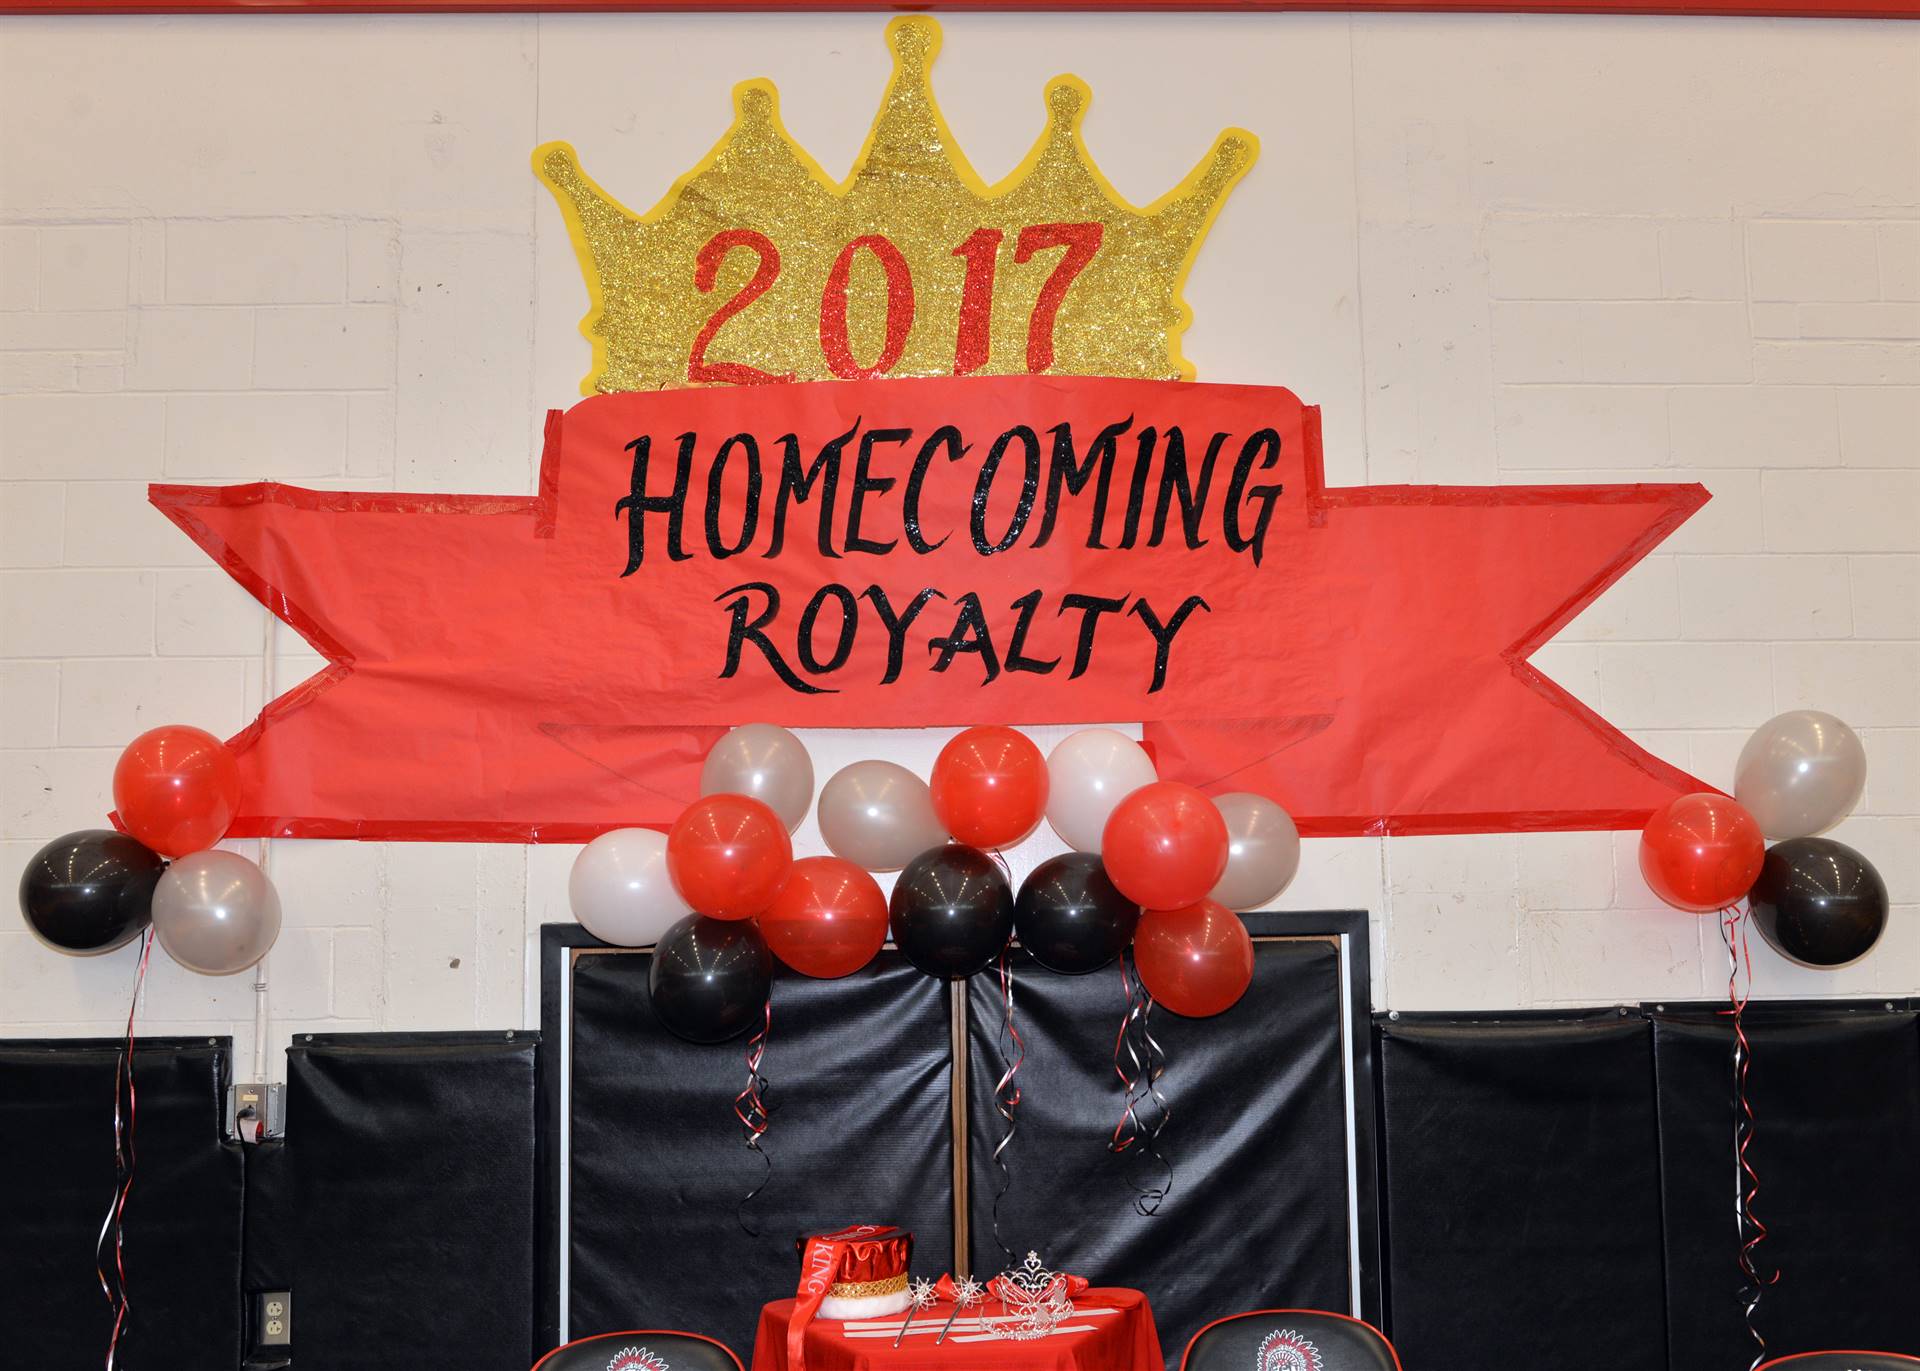 Homecoming stage